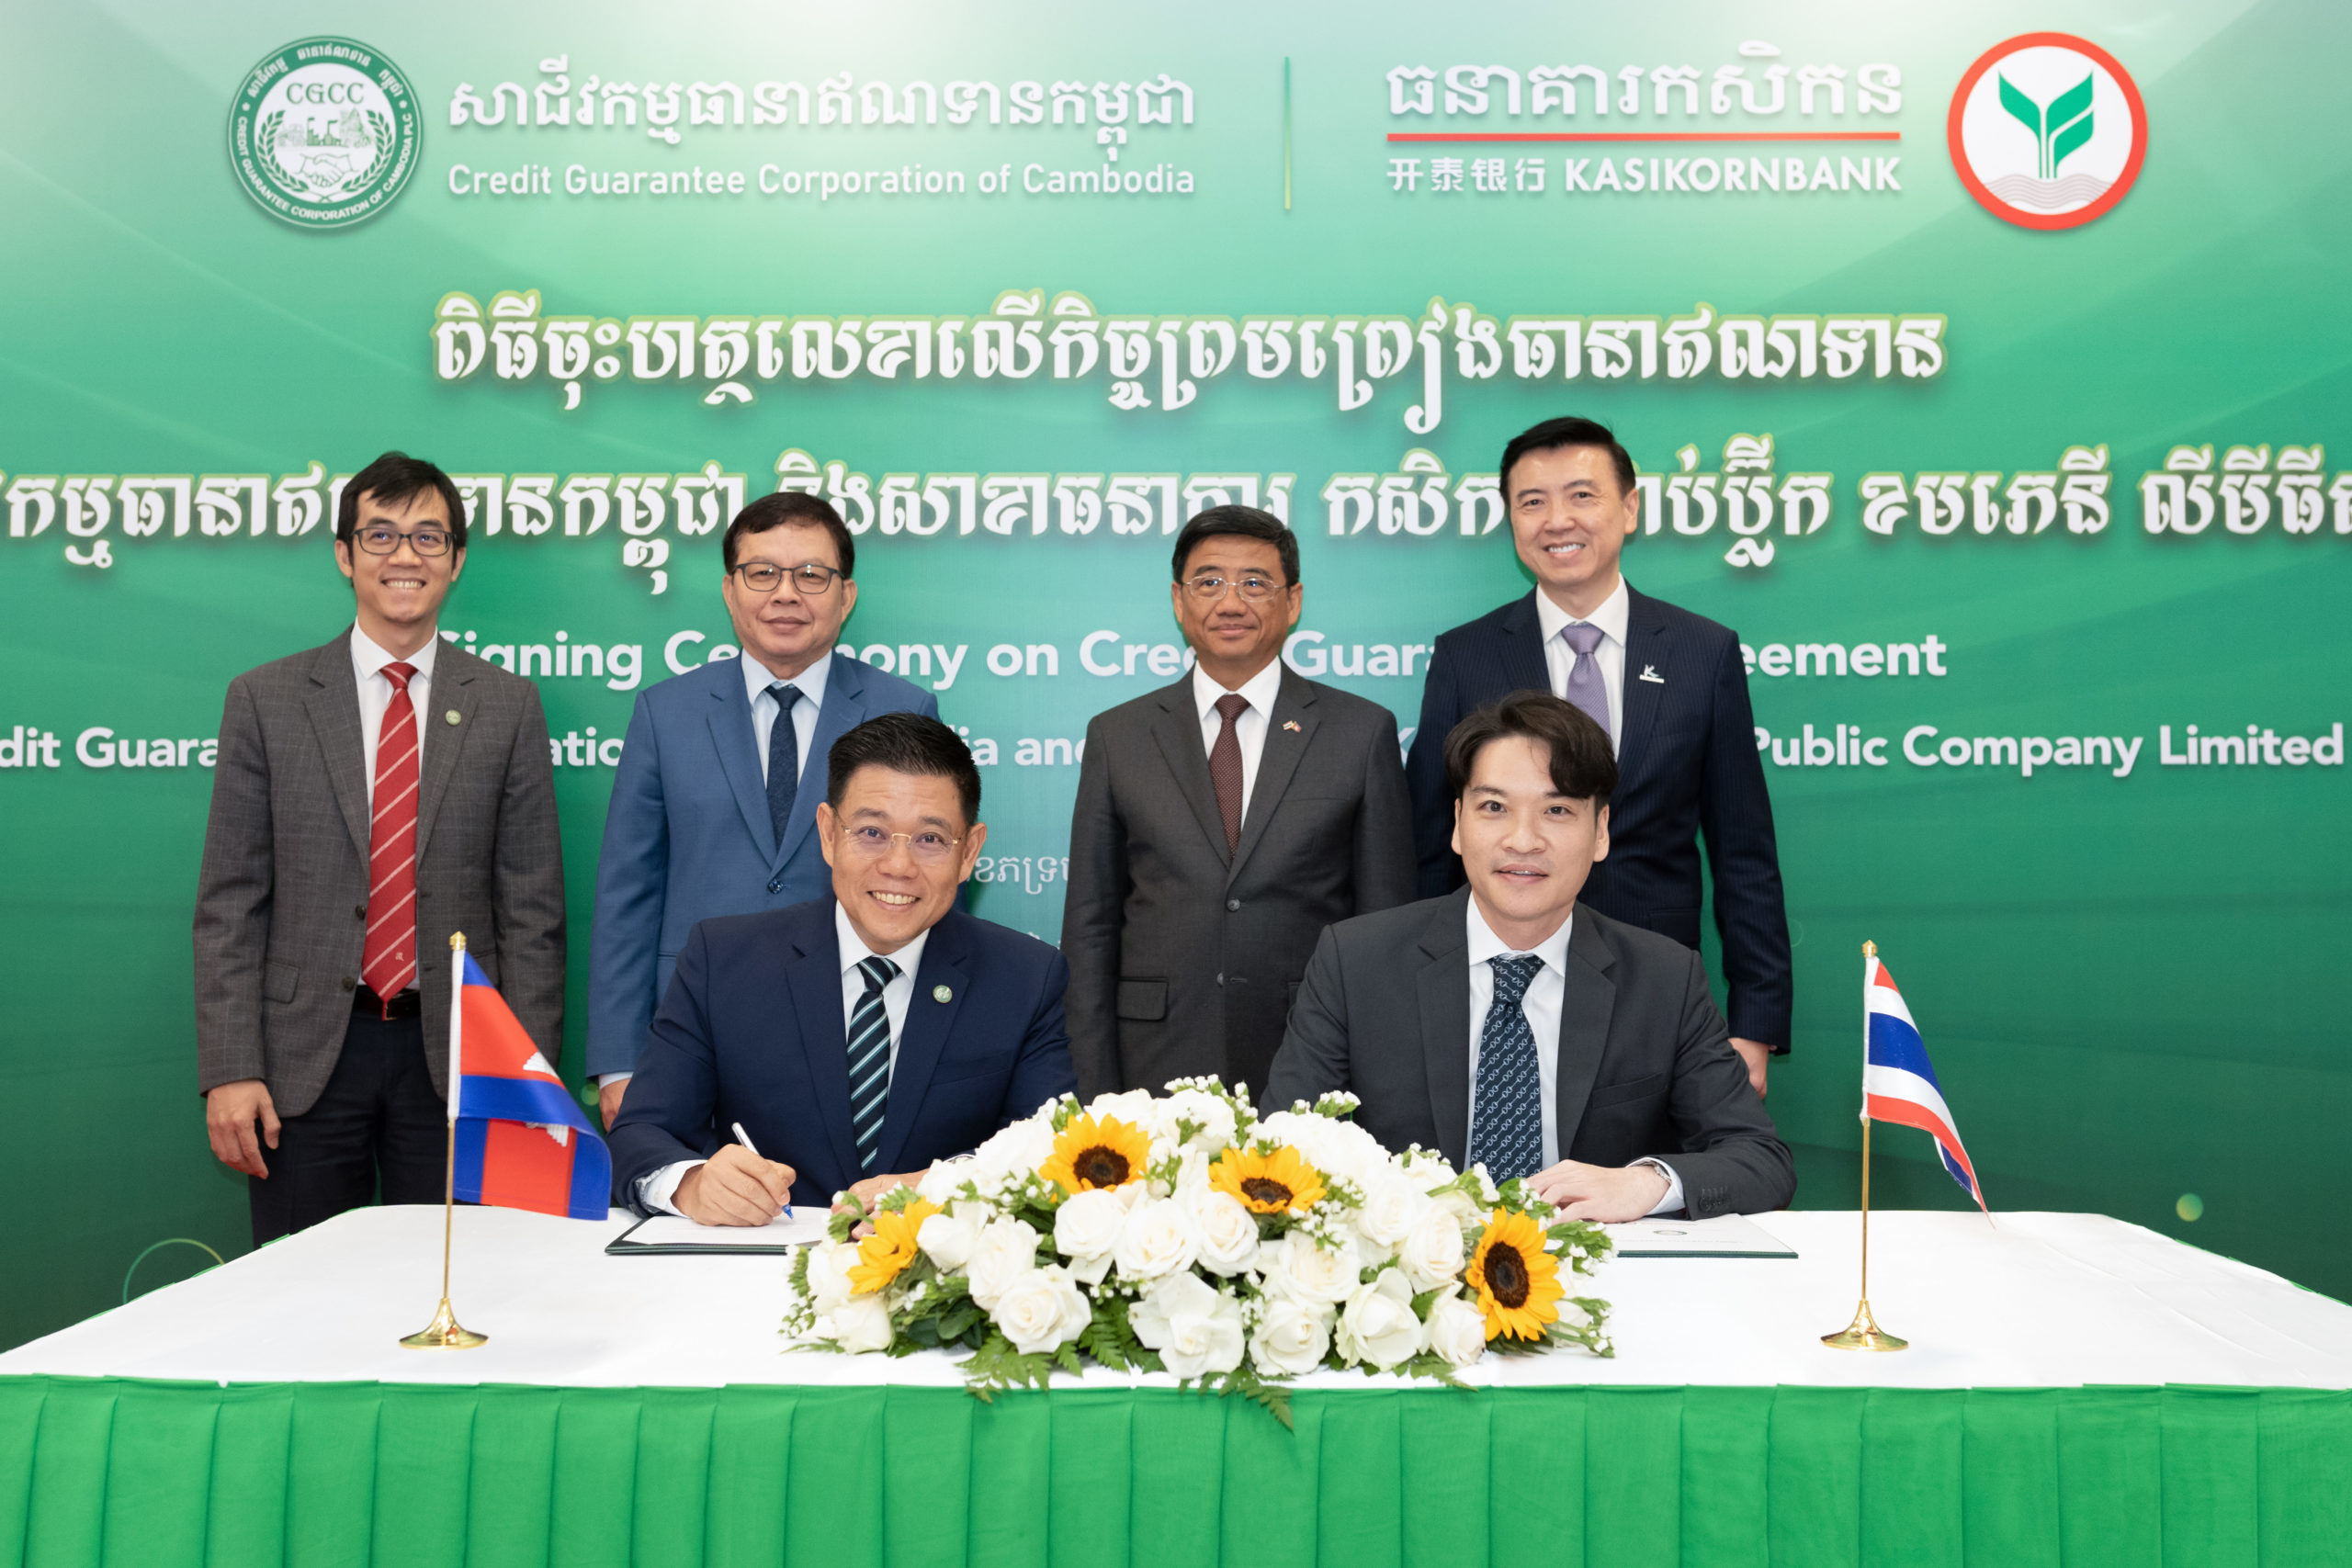 CGCC and the Branch of Kasikornbank Public Company Limited (Phnom Penh) Signed on Credit Guarantee Agreement to support Cambodian MSMEs  to Access to Guaranteed Loans